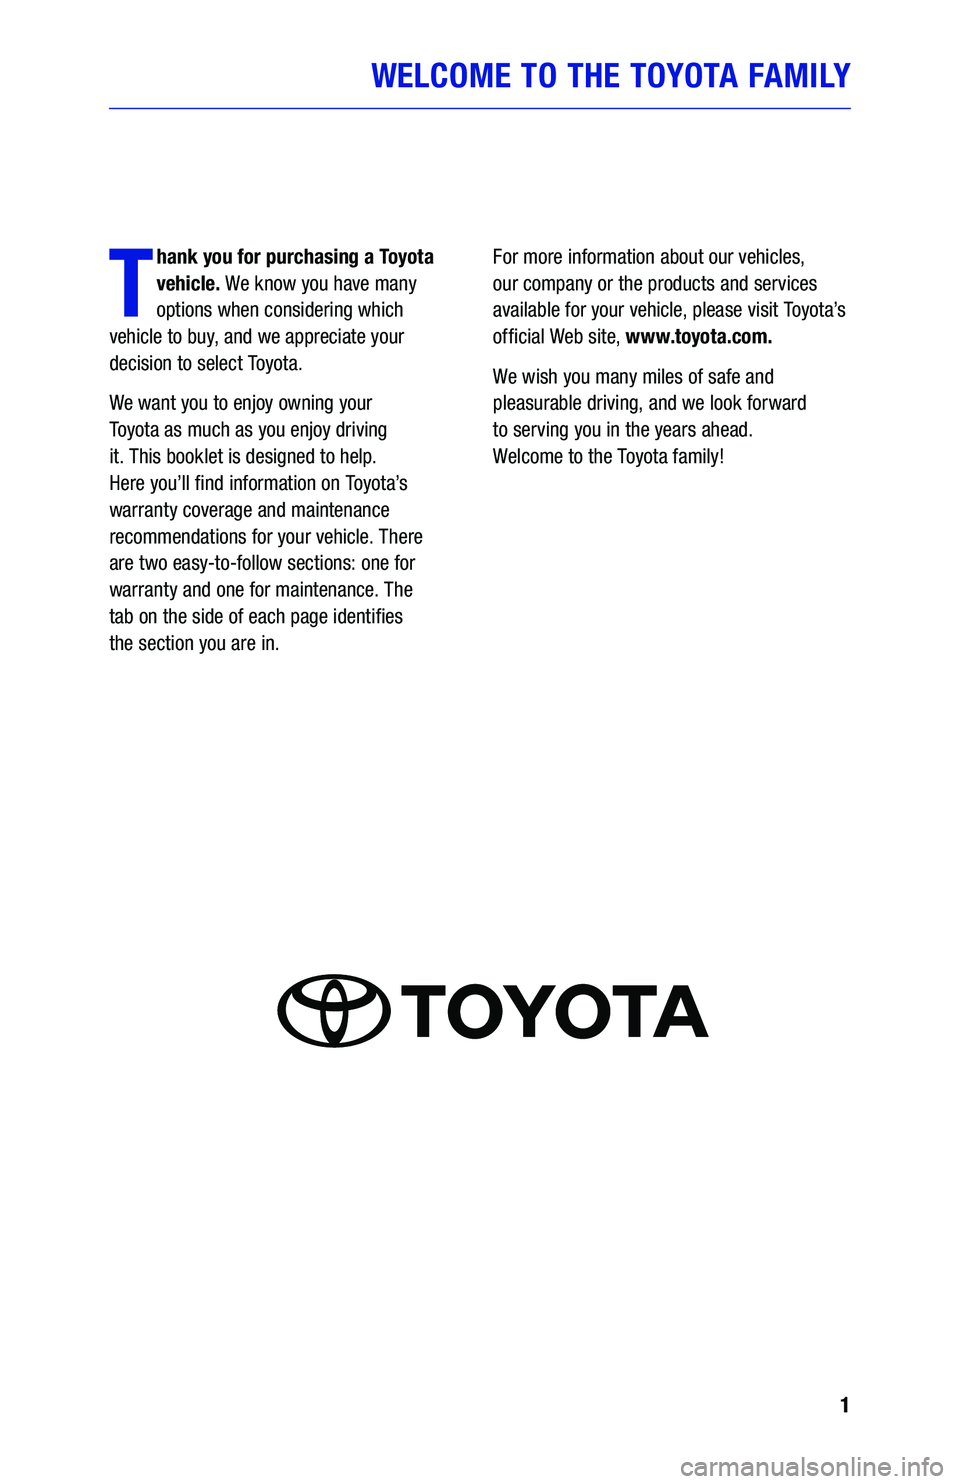 TOYOTA CAMRY 2019  Warranties & Maintenance Guides (in English) 1
WELCOME TO THE TOYOTA FAMILY
T
hank you for purchasing a Toyota 
vehicle. We know you have many 
options when considering which   
vehicle to buy, and we appreciate your 
decision to select Toyota.
